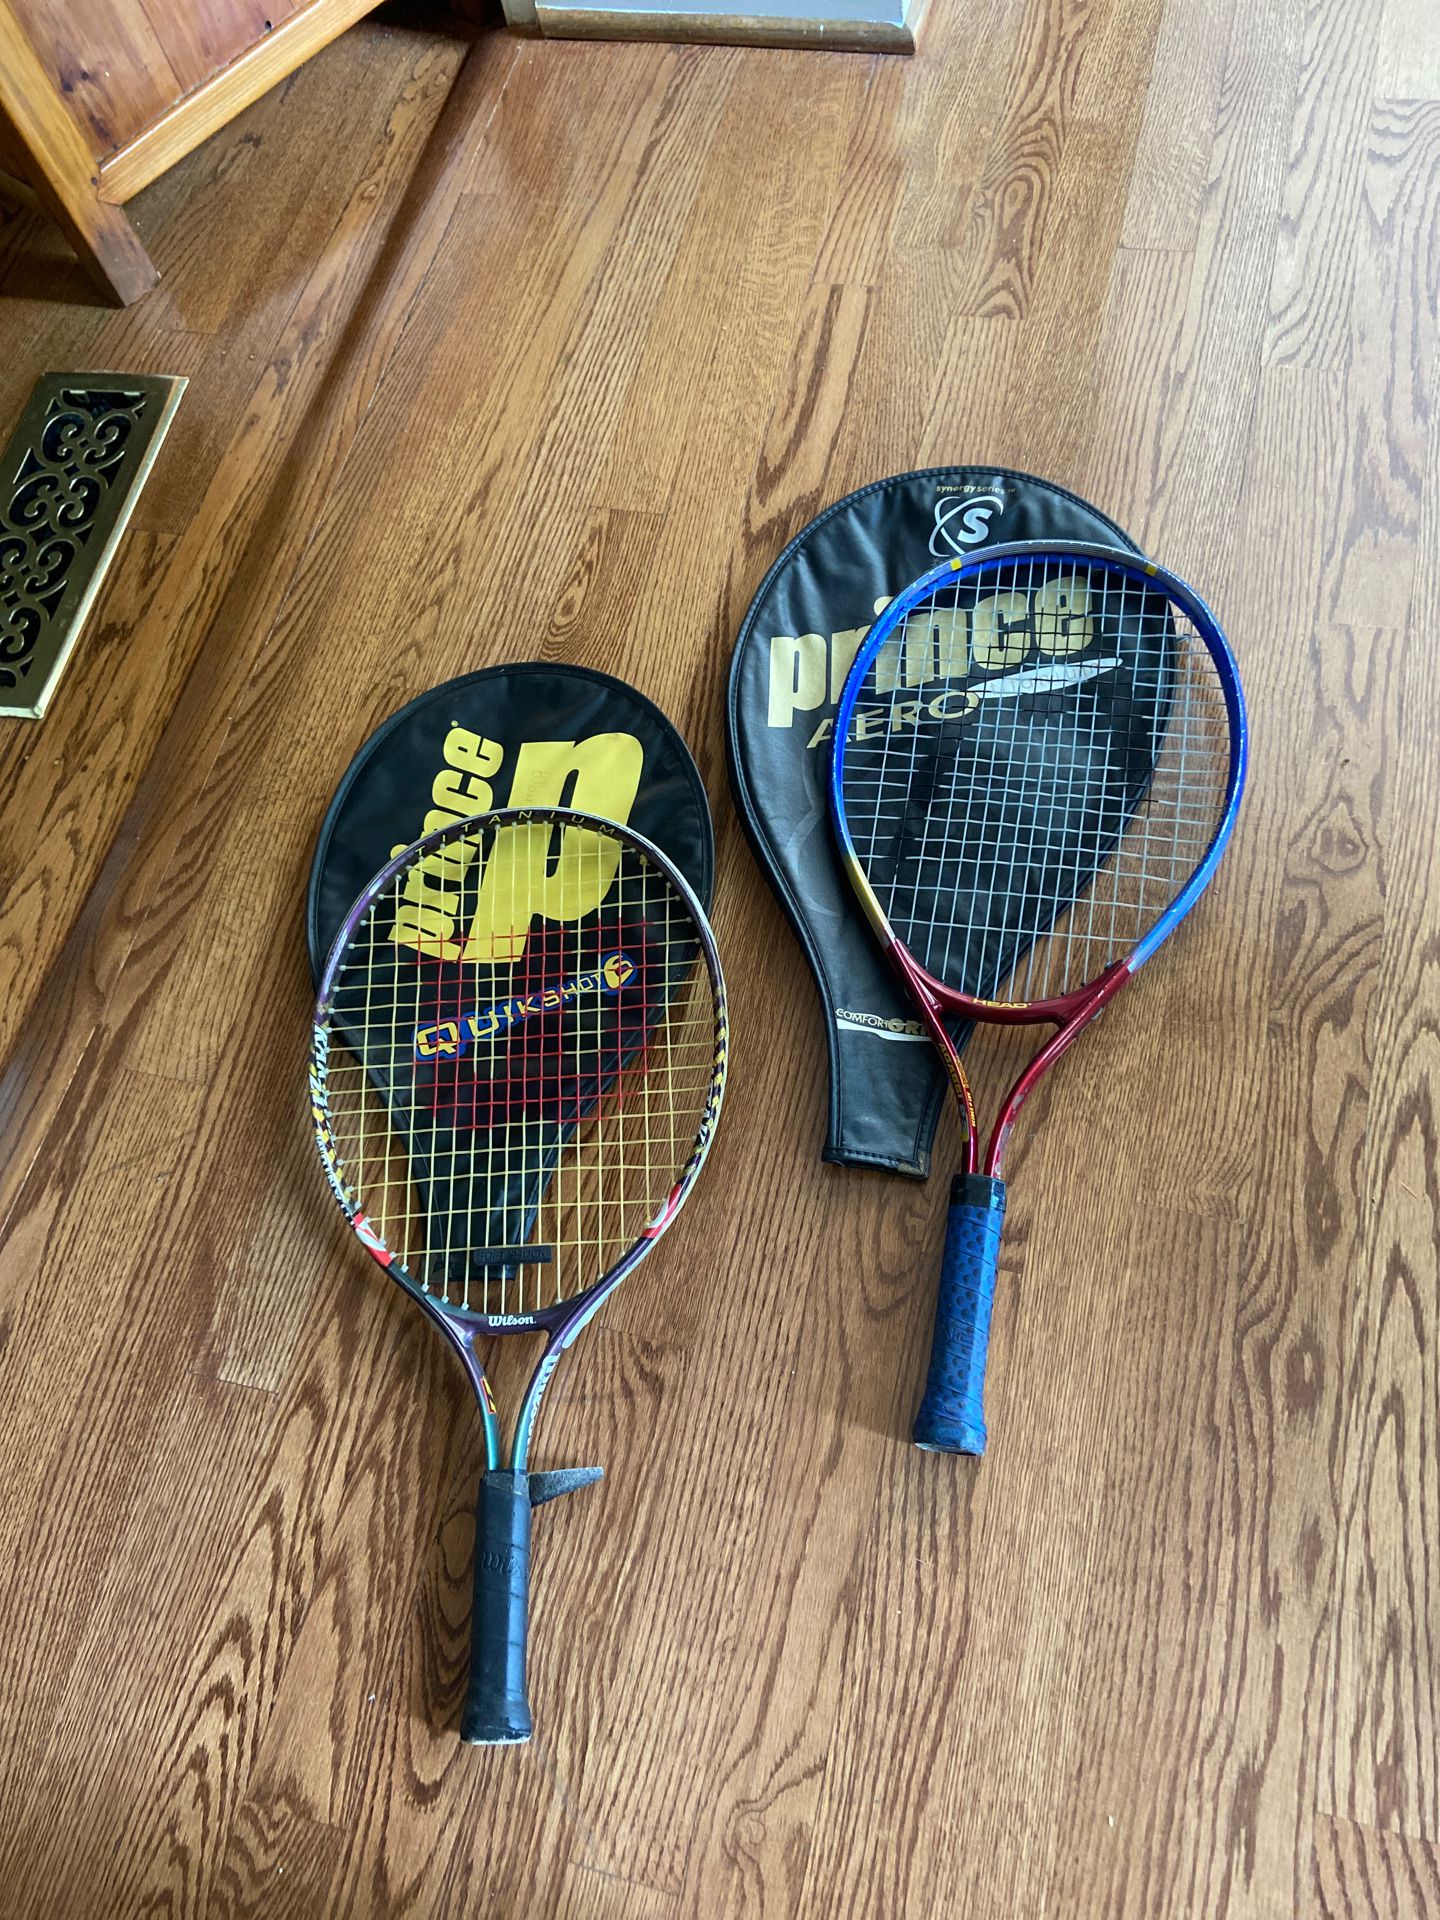 Head and riding tennis racket. Both children’s rackets